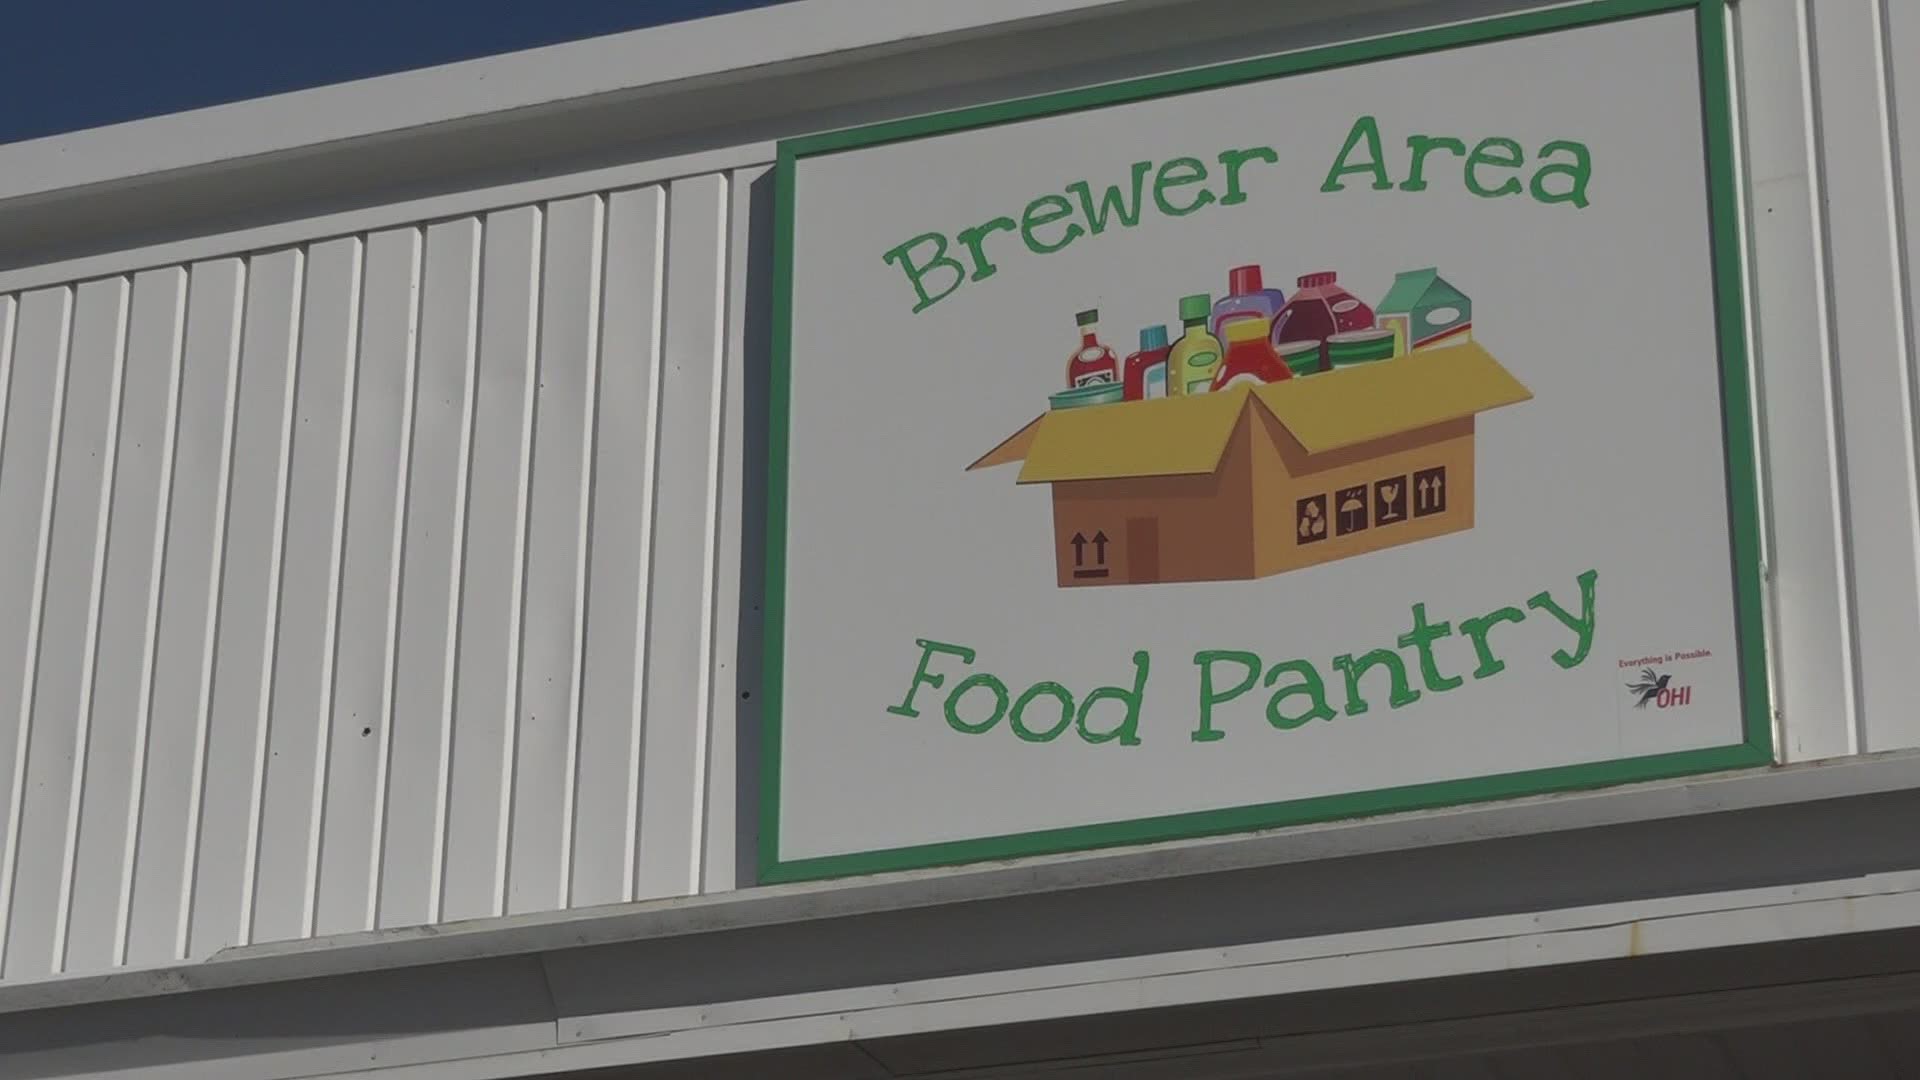 Brewer Area Food Pantry provides healthy meals for cancer patients